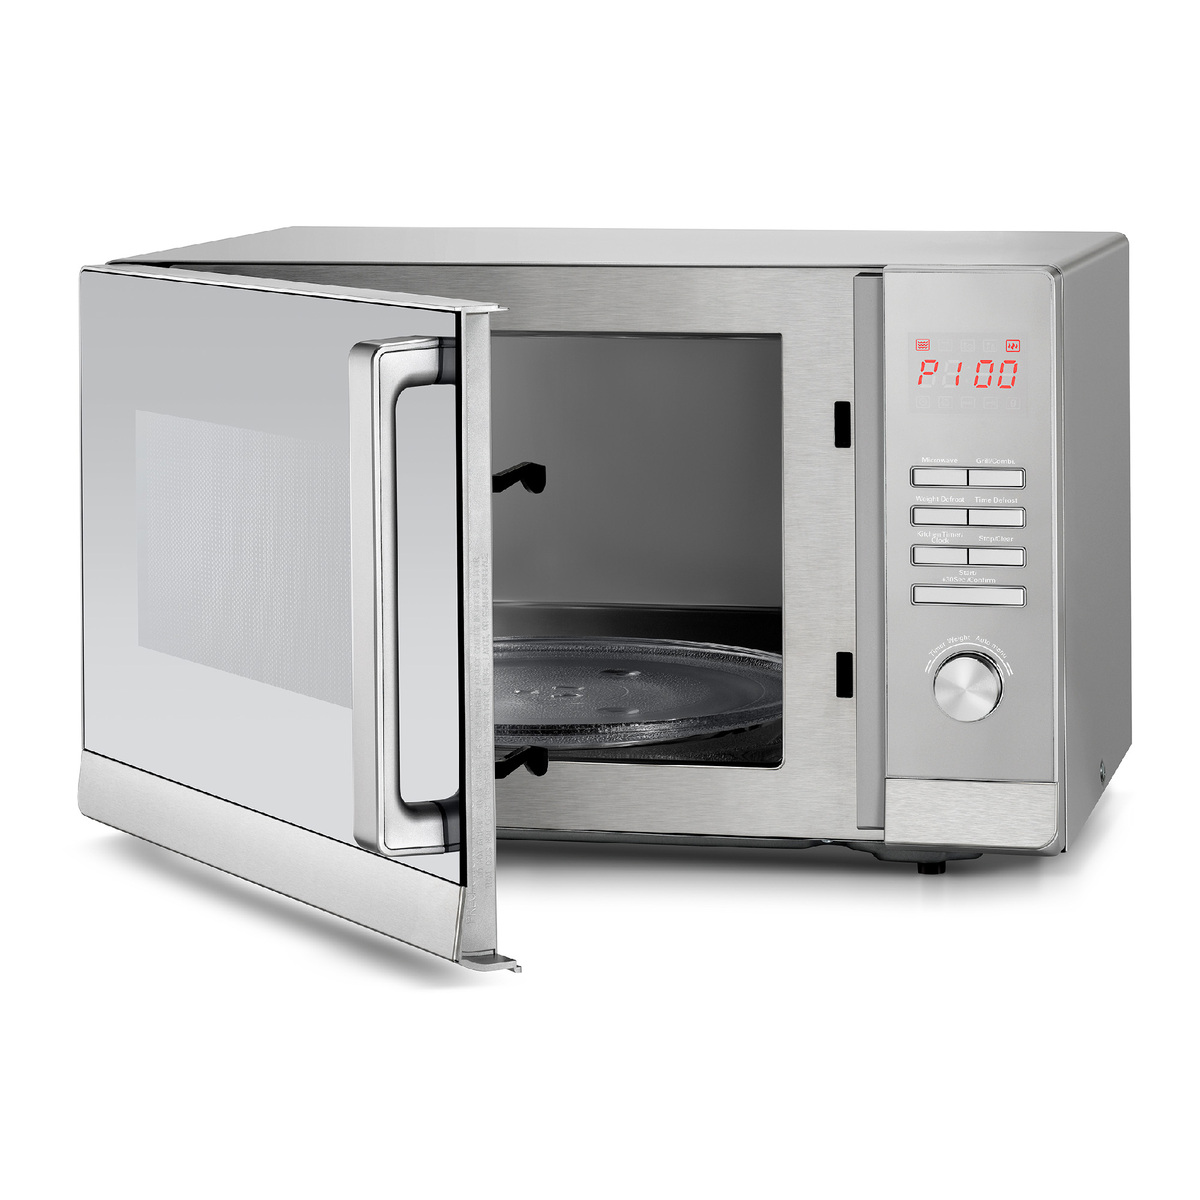 Black Decker Microwave Ovens, 30 L, 900 W With Mirror Finish, MZ30PGSSI